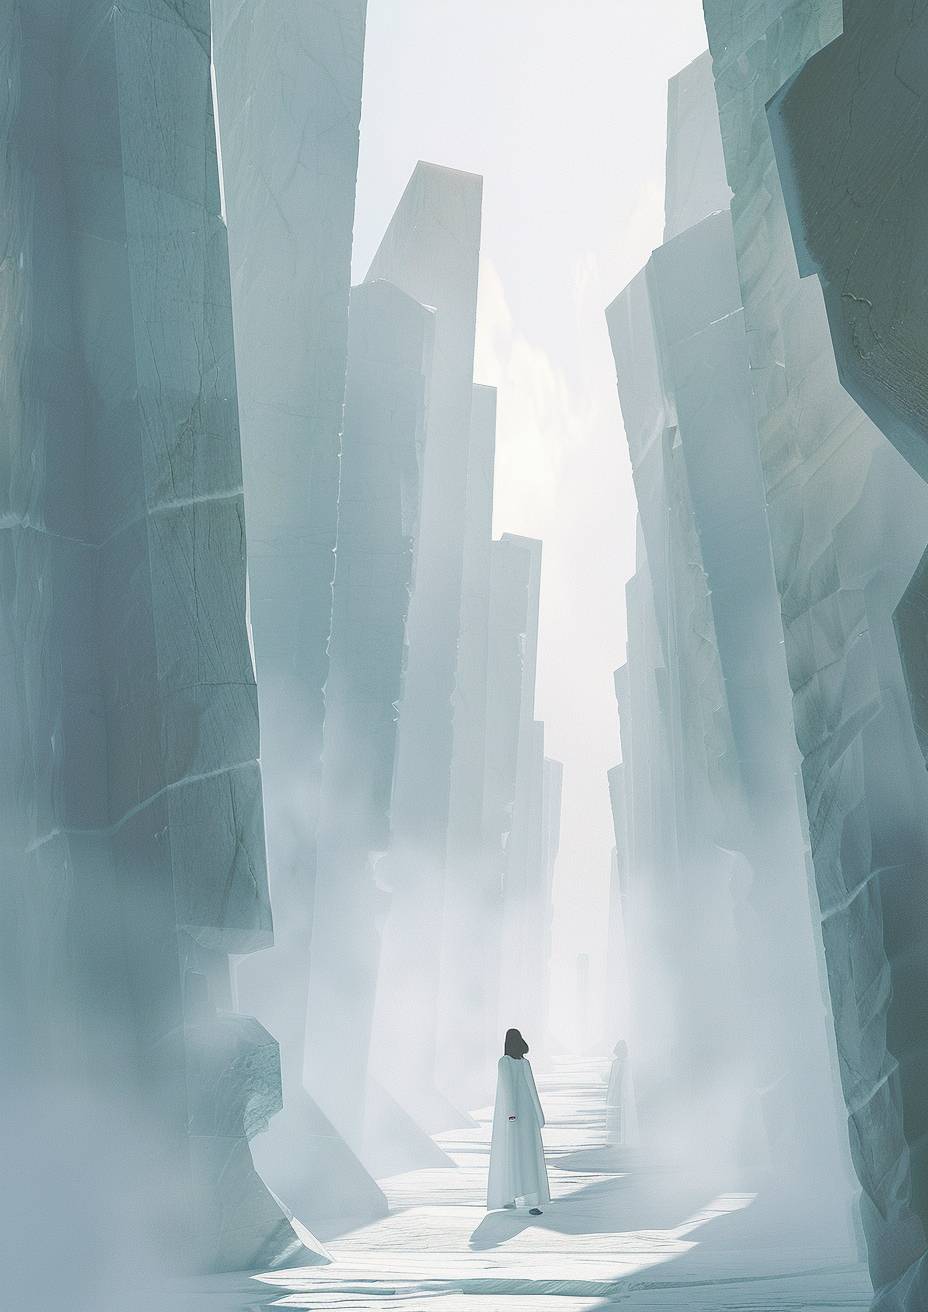 Inside a haze-filled liminal space, white geometric sculptures, regular stone pillars, a beautiful woman in the distance, monochromatic, surreal dreamlike atmosphere, diffuse light, minimalist strong visual flow